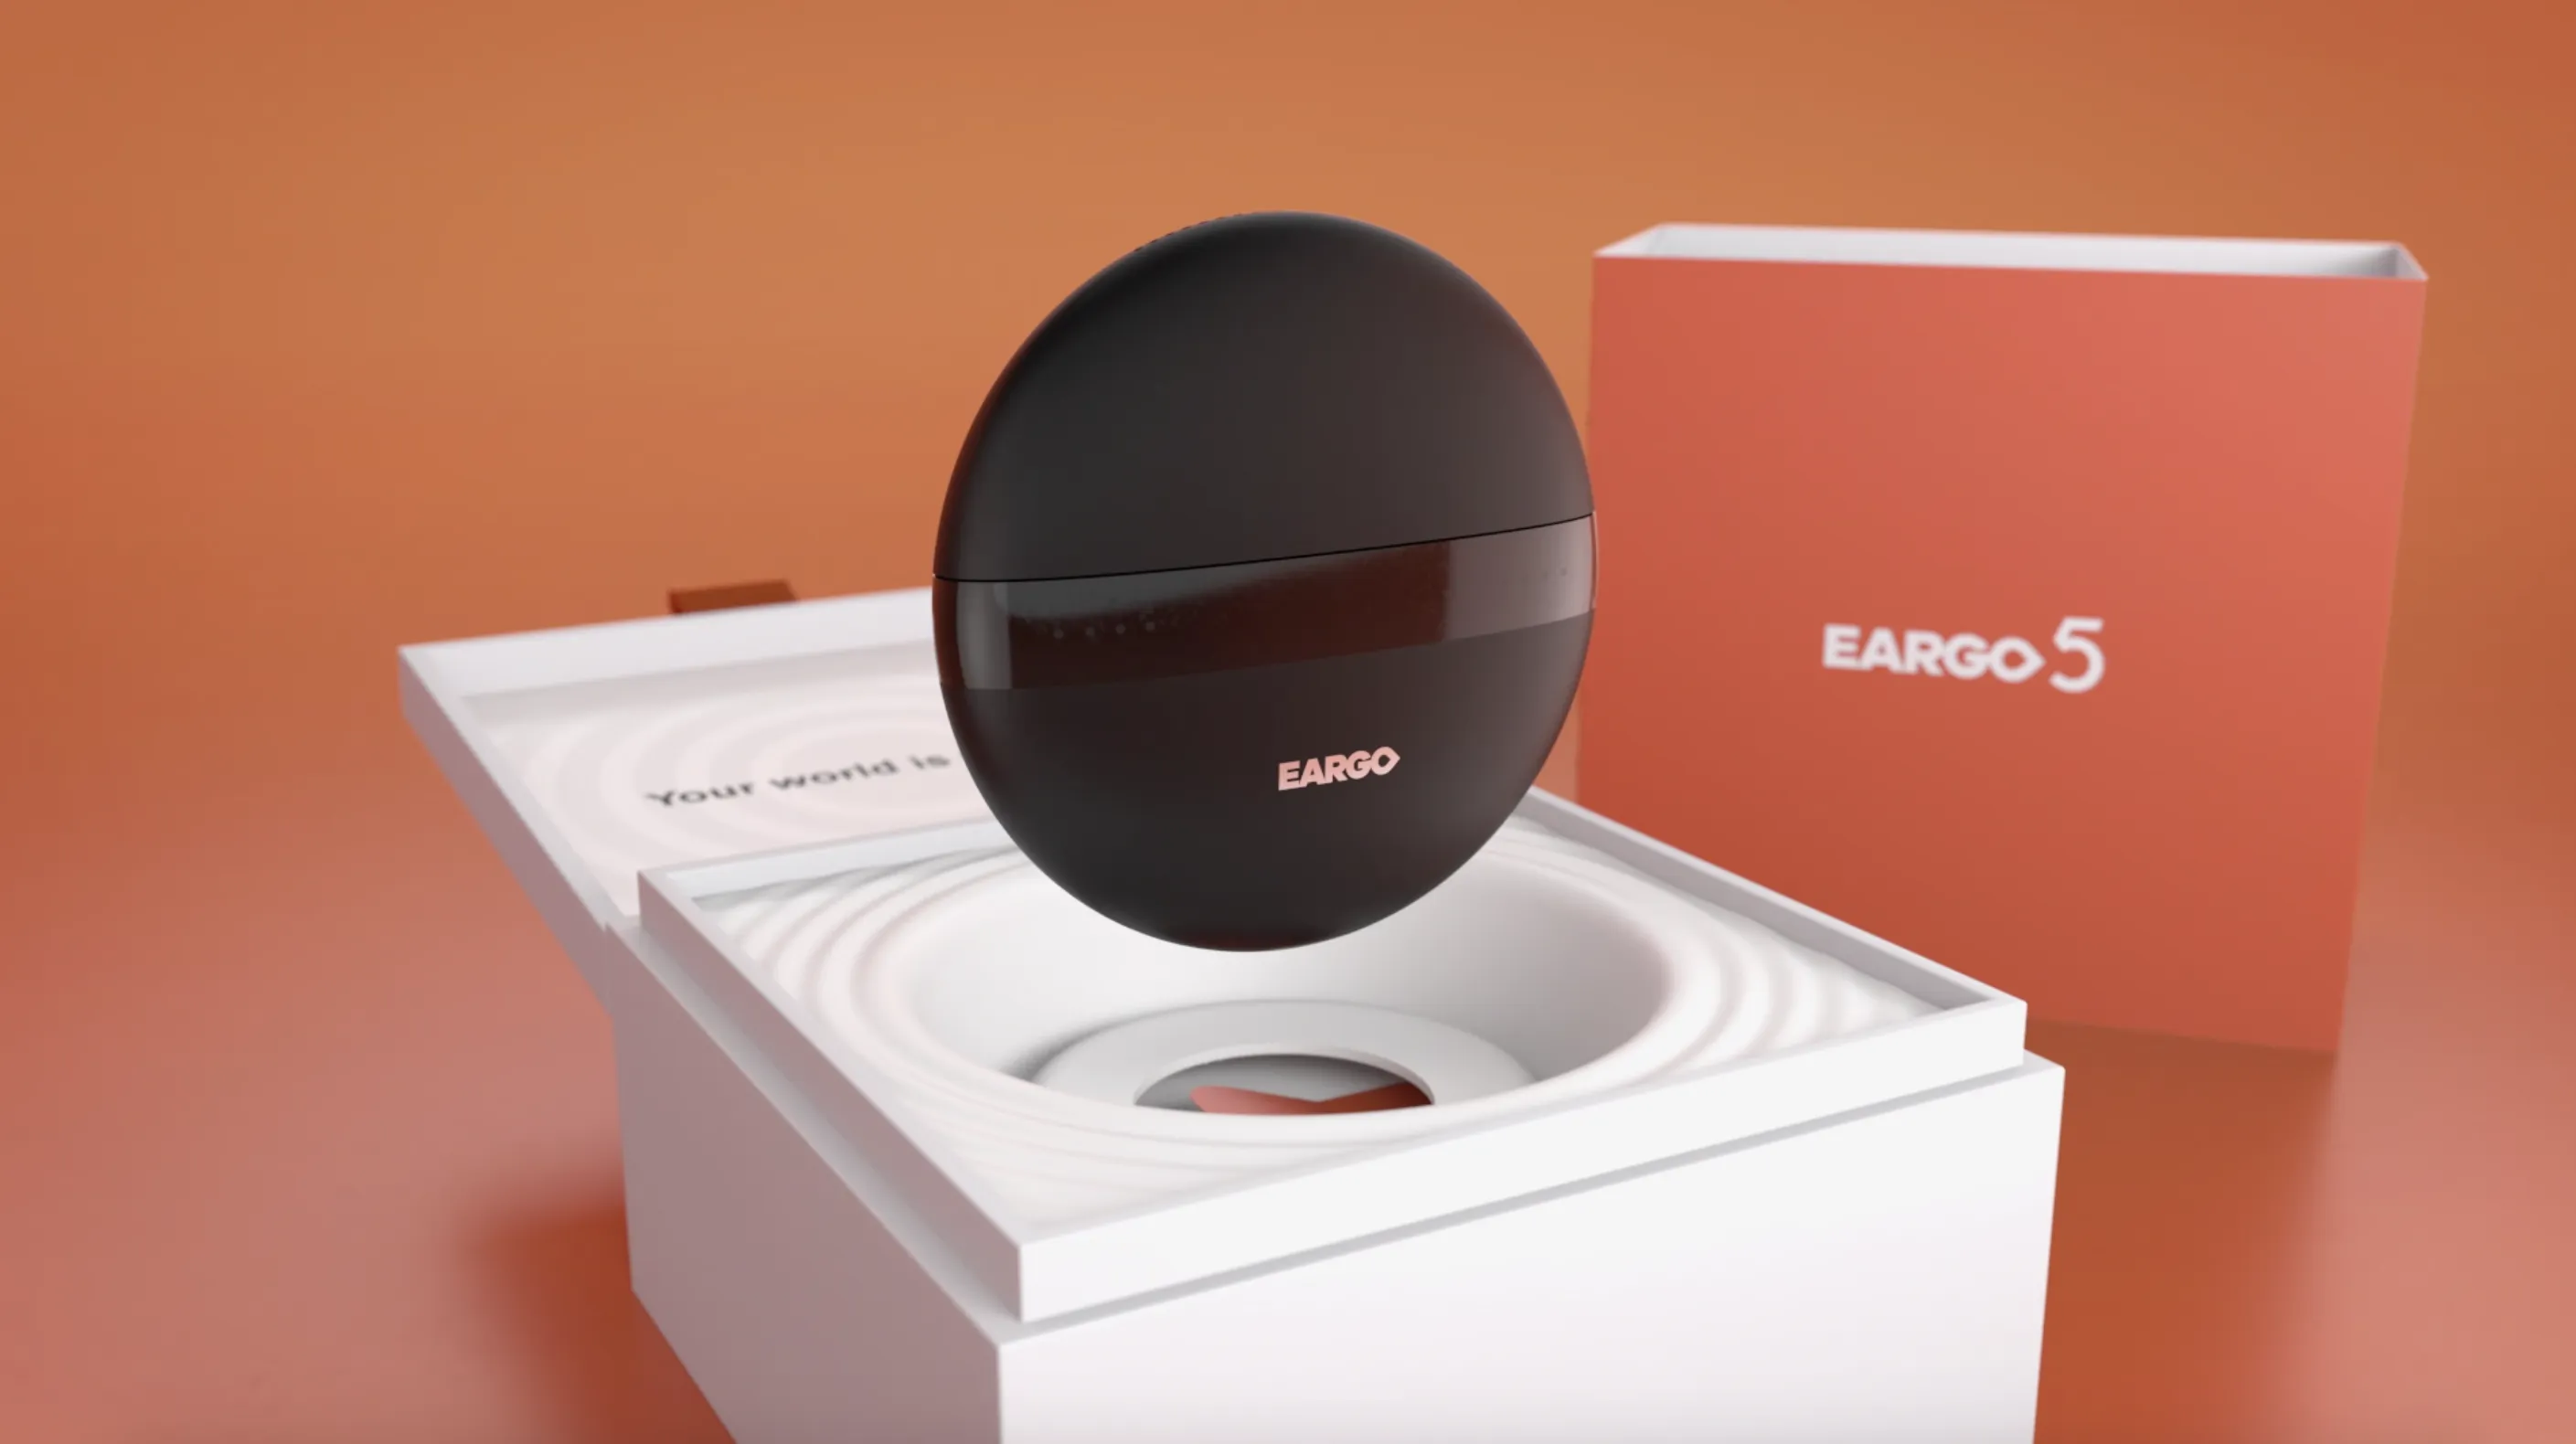 Eargo 5 charger above box